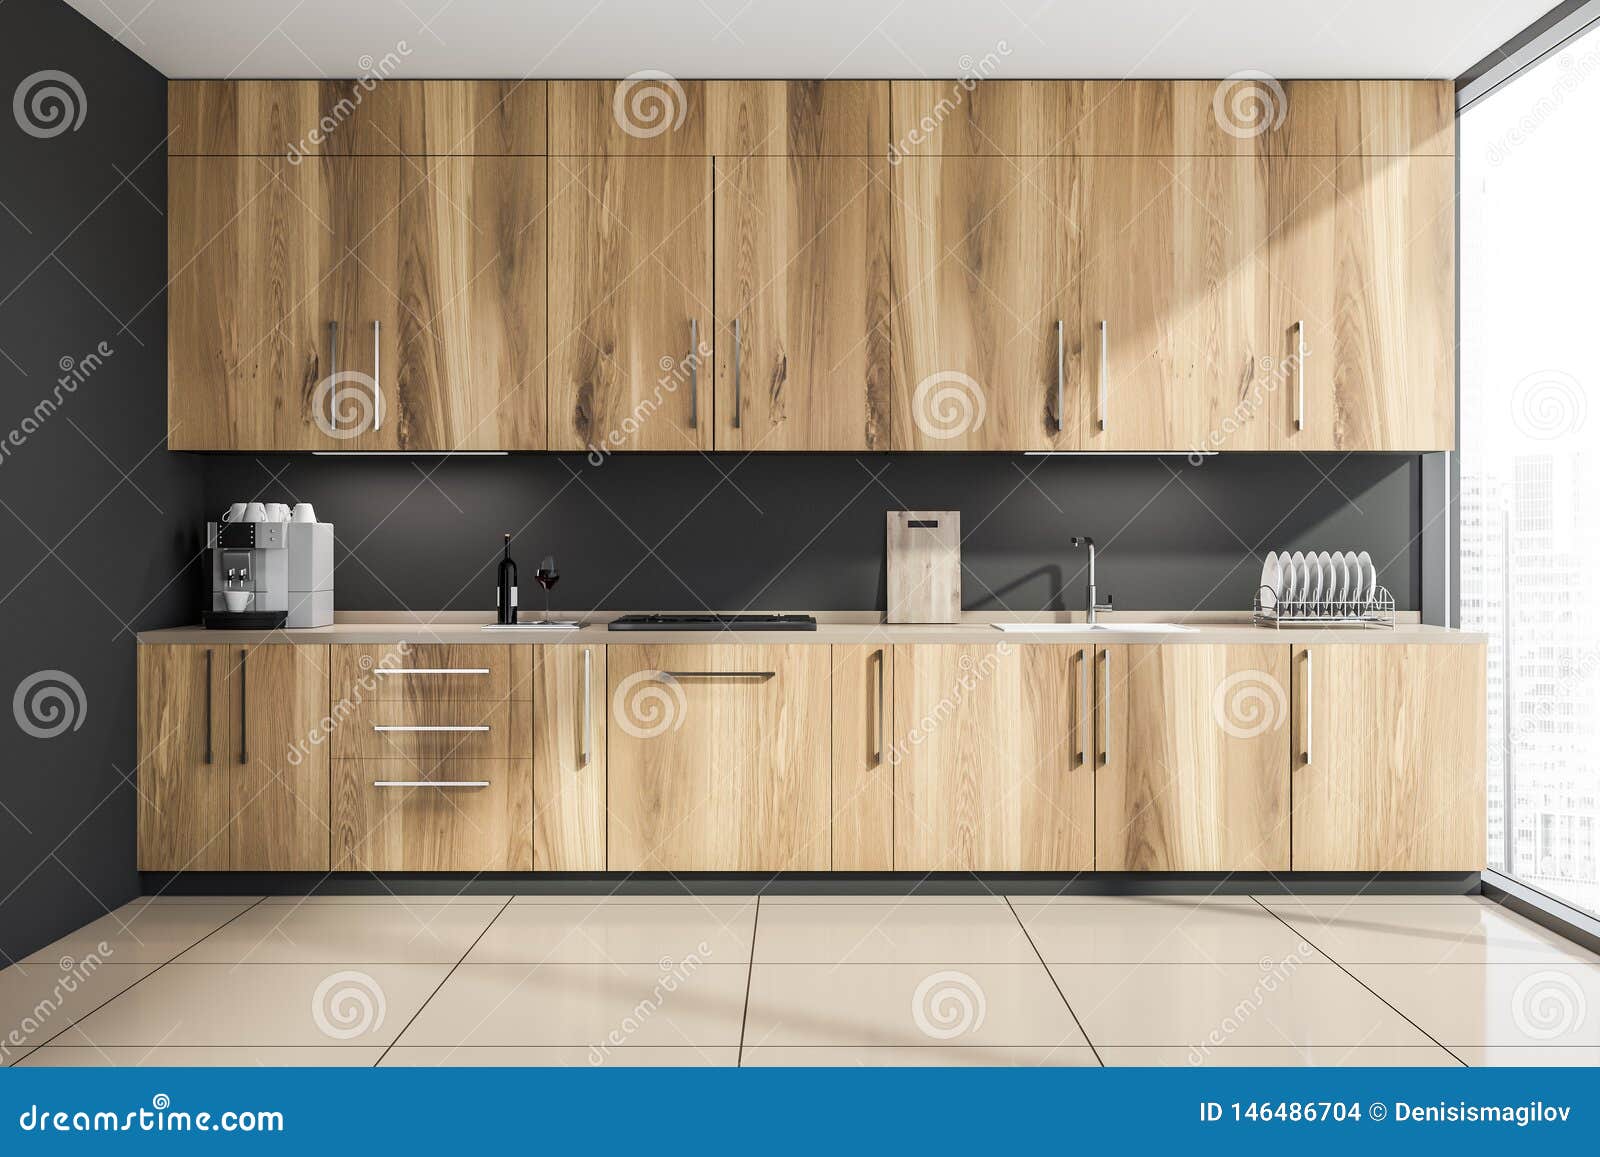 Gray Kitchen With Wooden Countertops Stock Illustration